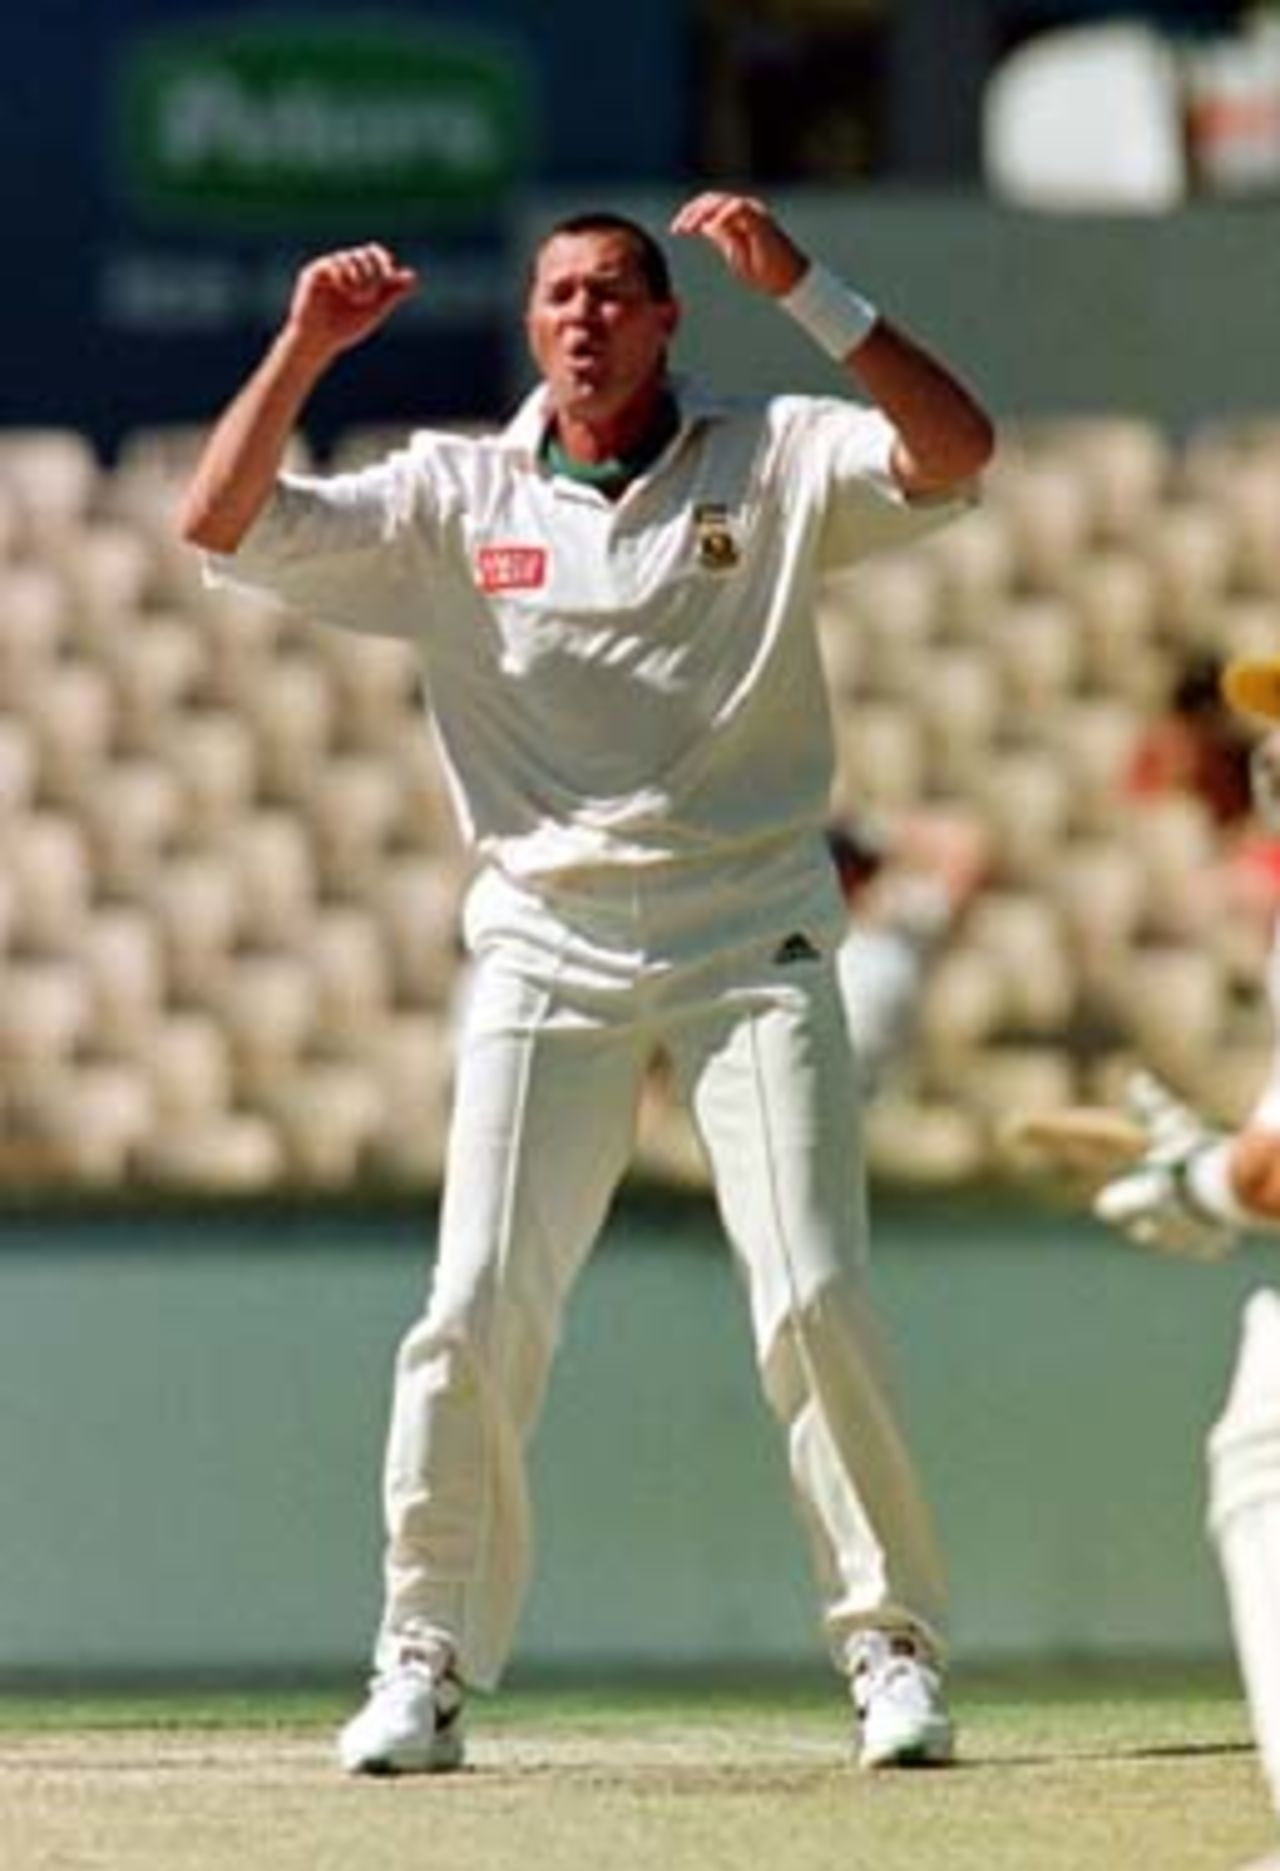 Anguish for Symcox as the ball misses the edge ... South Africans v Western Australia, at the WACA, Perth, Day 4 Novbember 30th 1997.